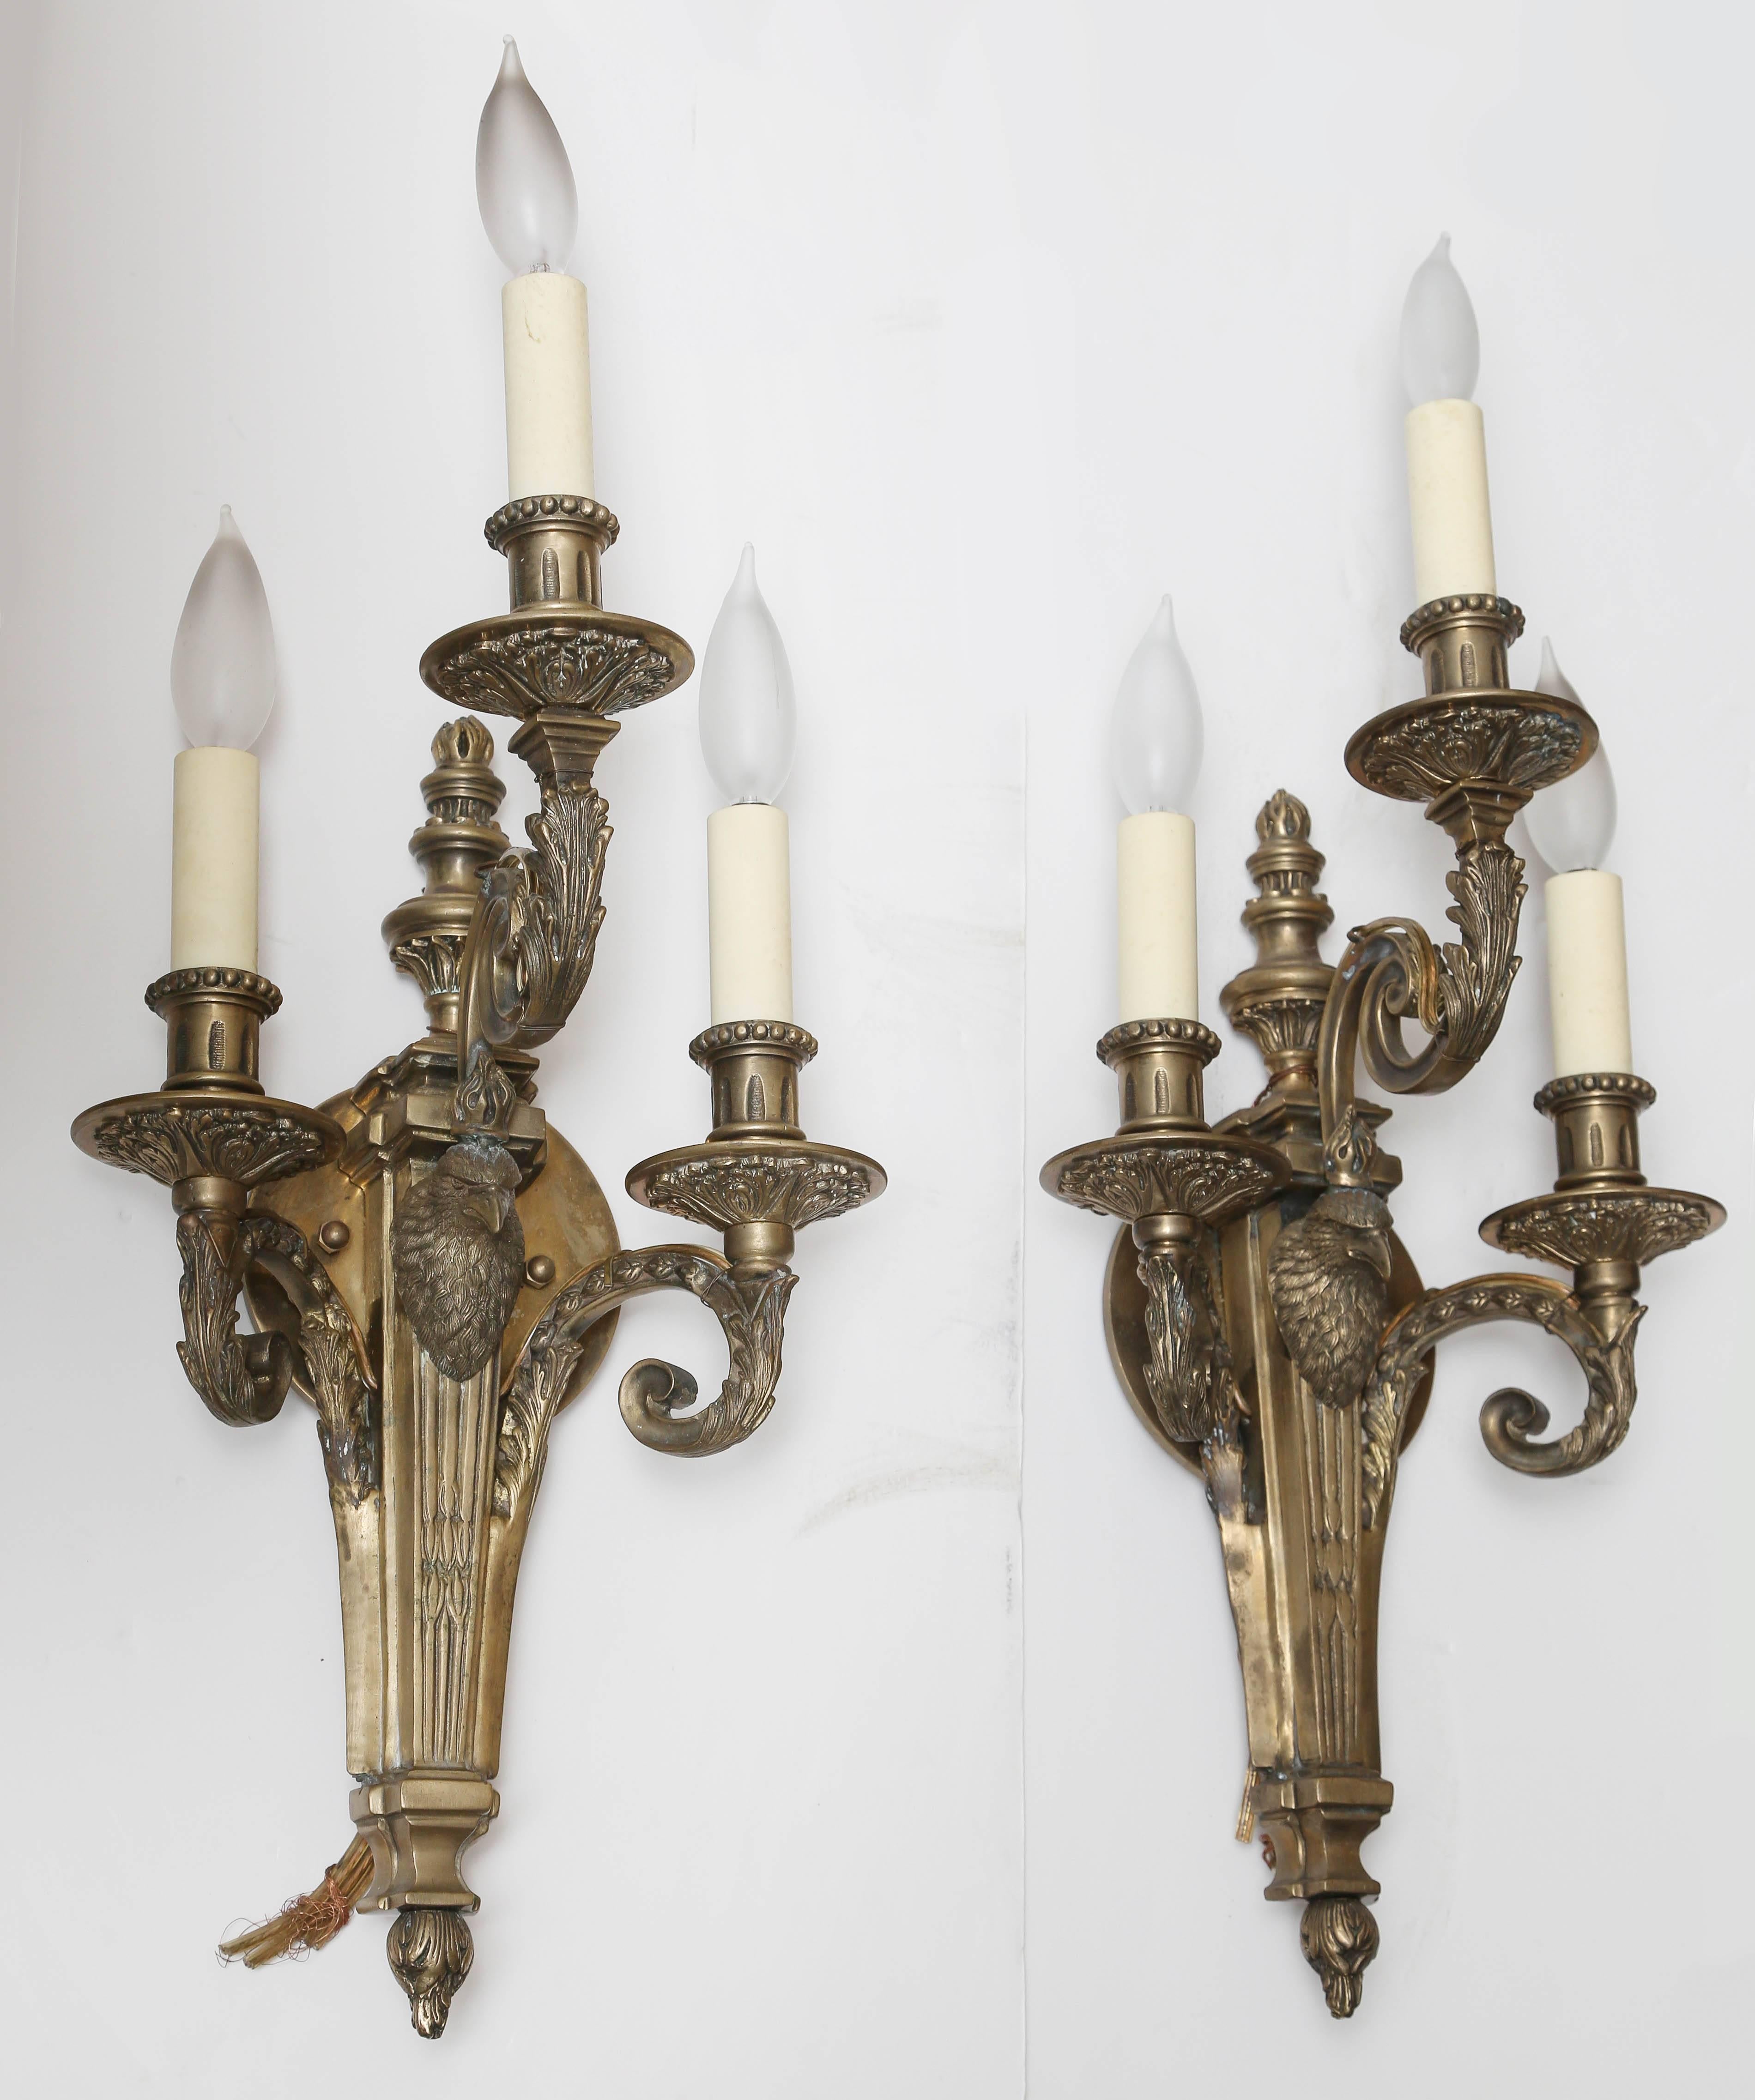 Superb Pair Of Russian Empire Style Sconces 1